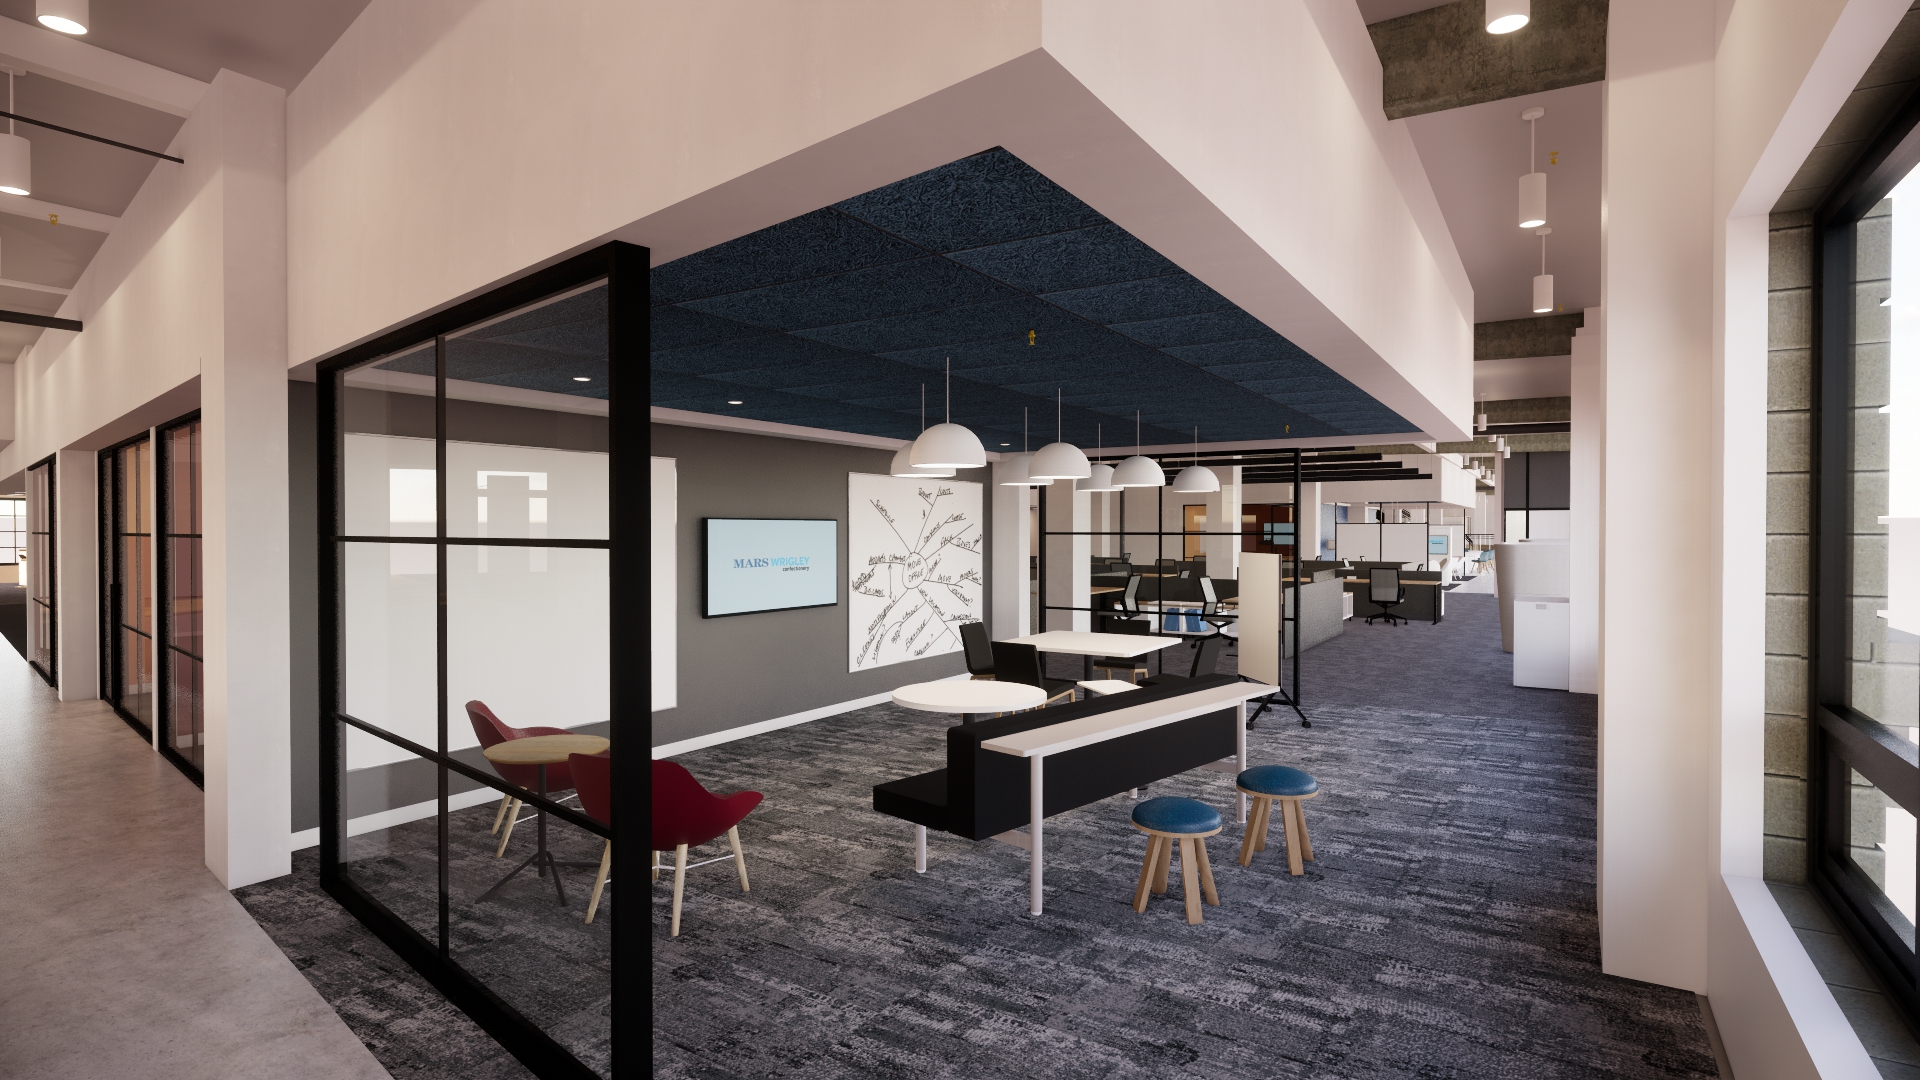 A new collaboration space called "The Library" at the new Mars Wrigley headquarters